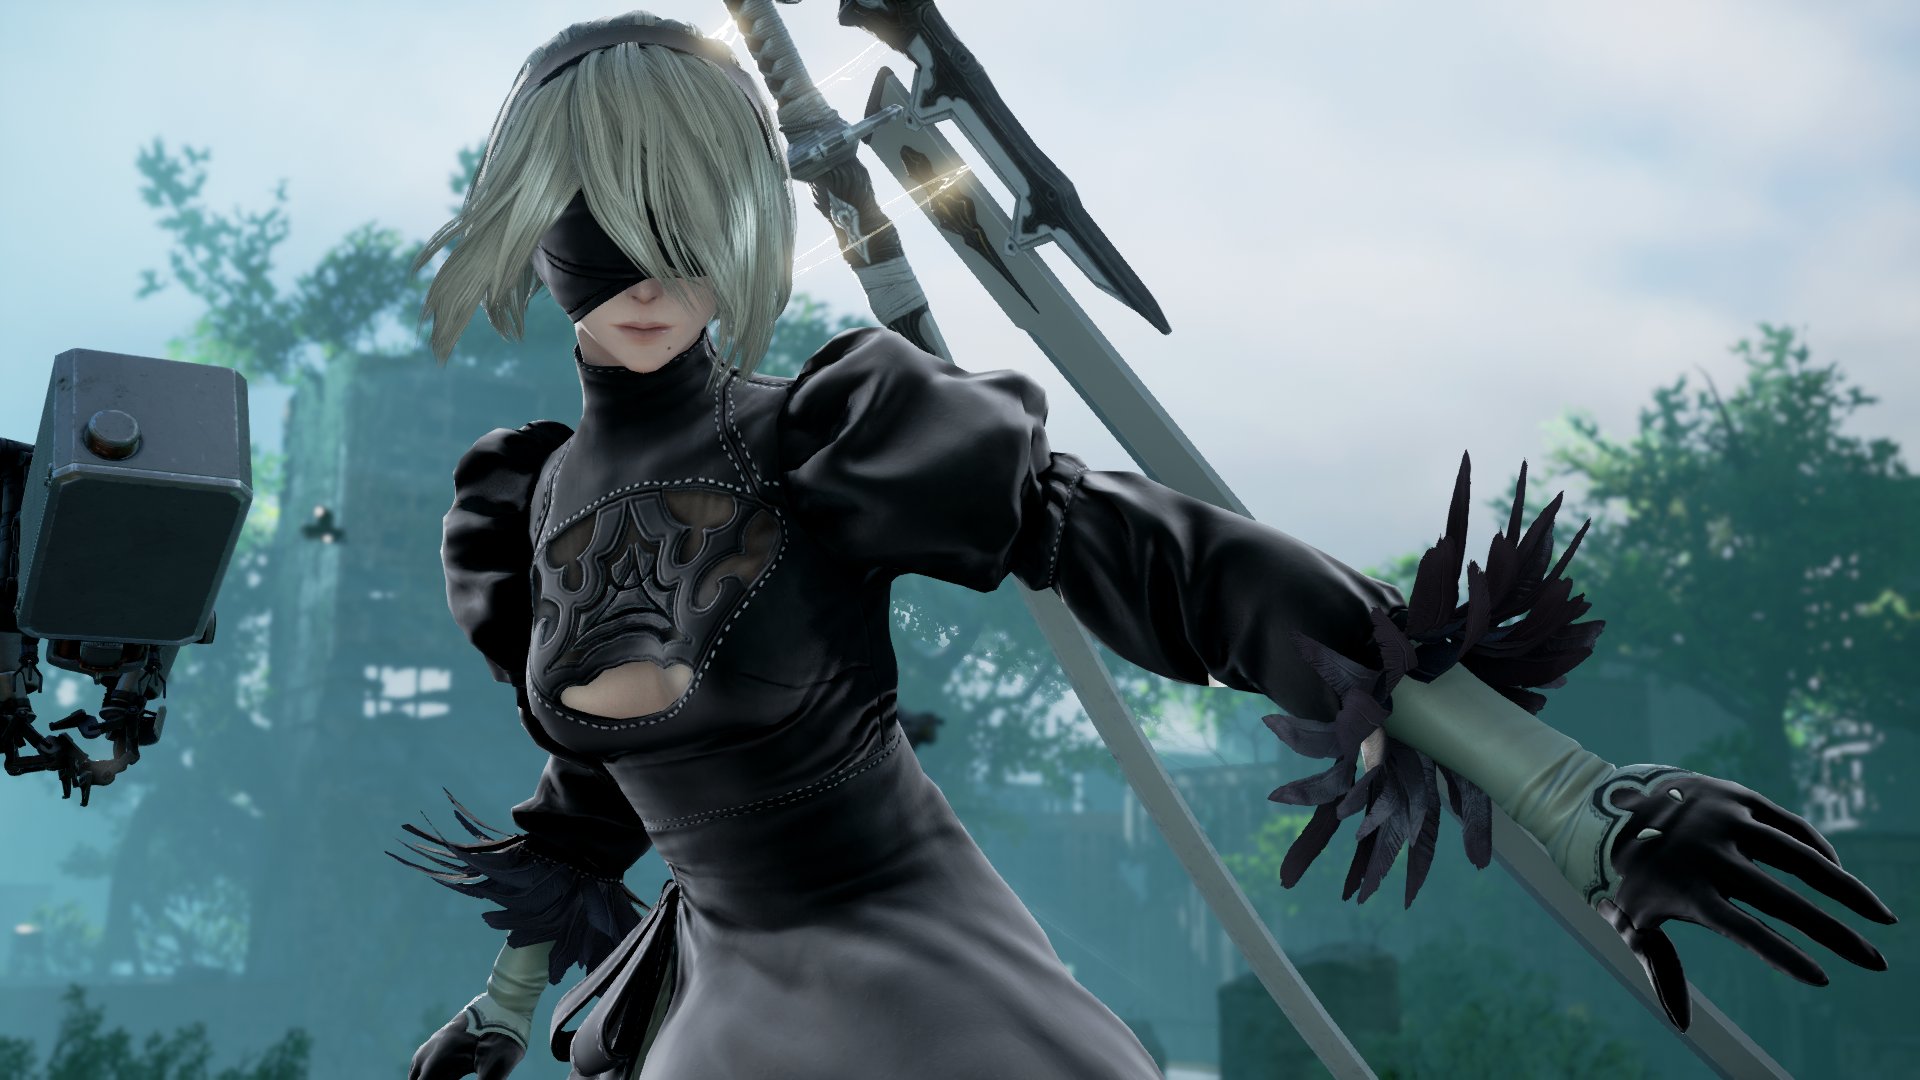 Update: Over 100 new screenshots of 2B from Soul Calibur 6 have now been ad...